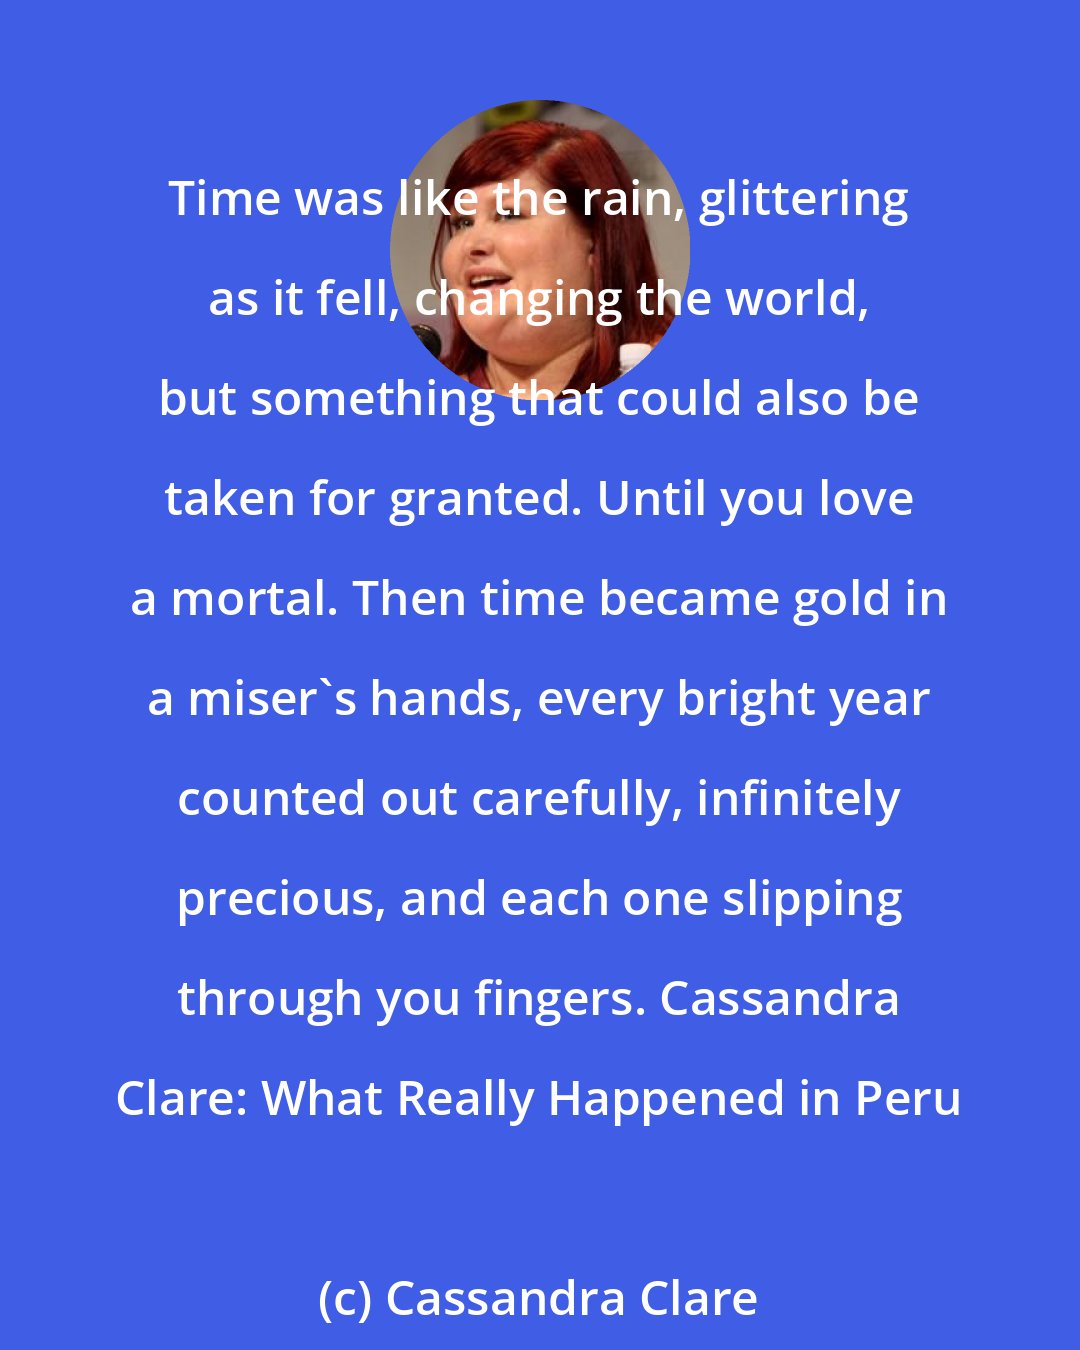 Cassandra Clare: Time was like the rain, glittering as it fell, changing the world, but something that could also be taken for granted. Until you love a mortal. Then time became gold in a miser's hands, every bright year counted out carefully, infinitely precious, and each one slipping through you fingers. Cassandra Clare: What Really Happened in Peru